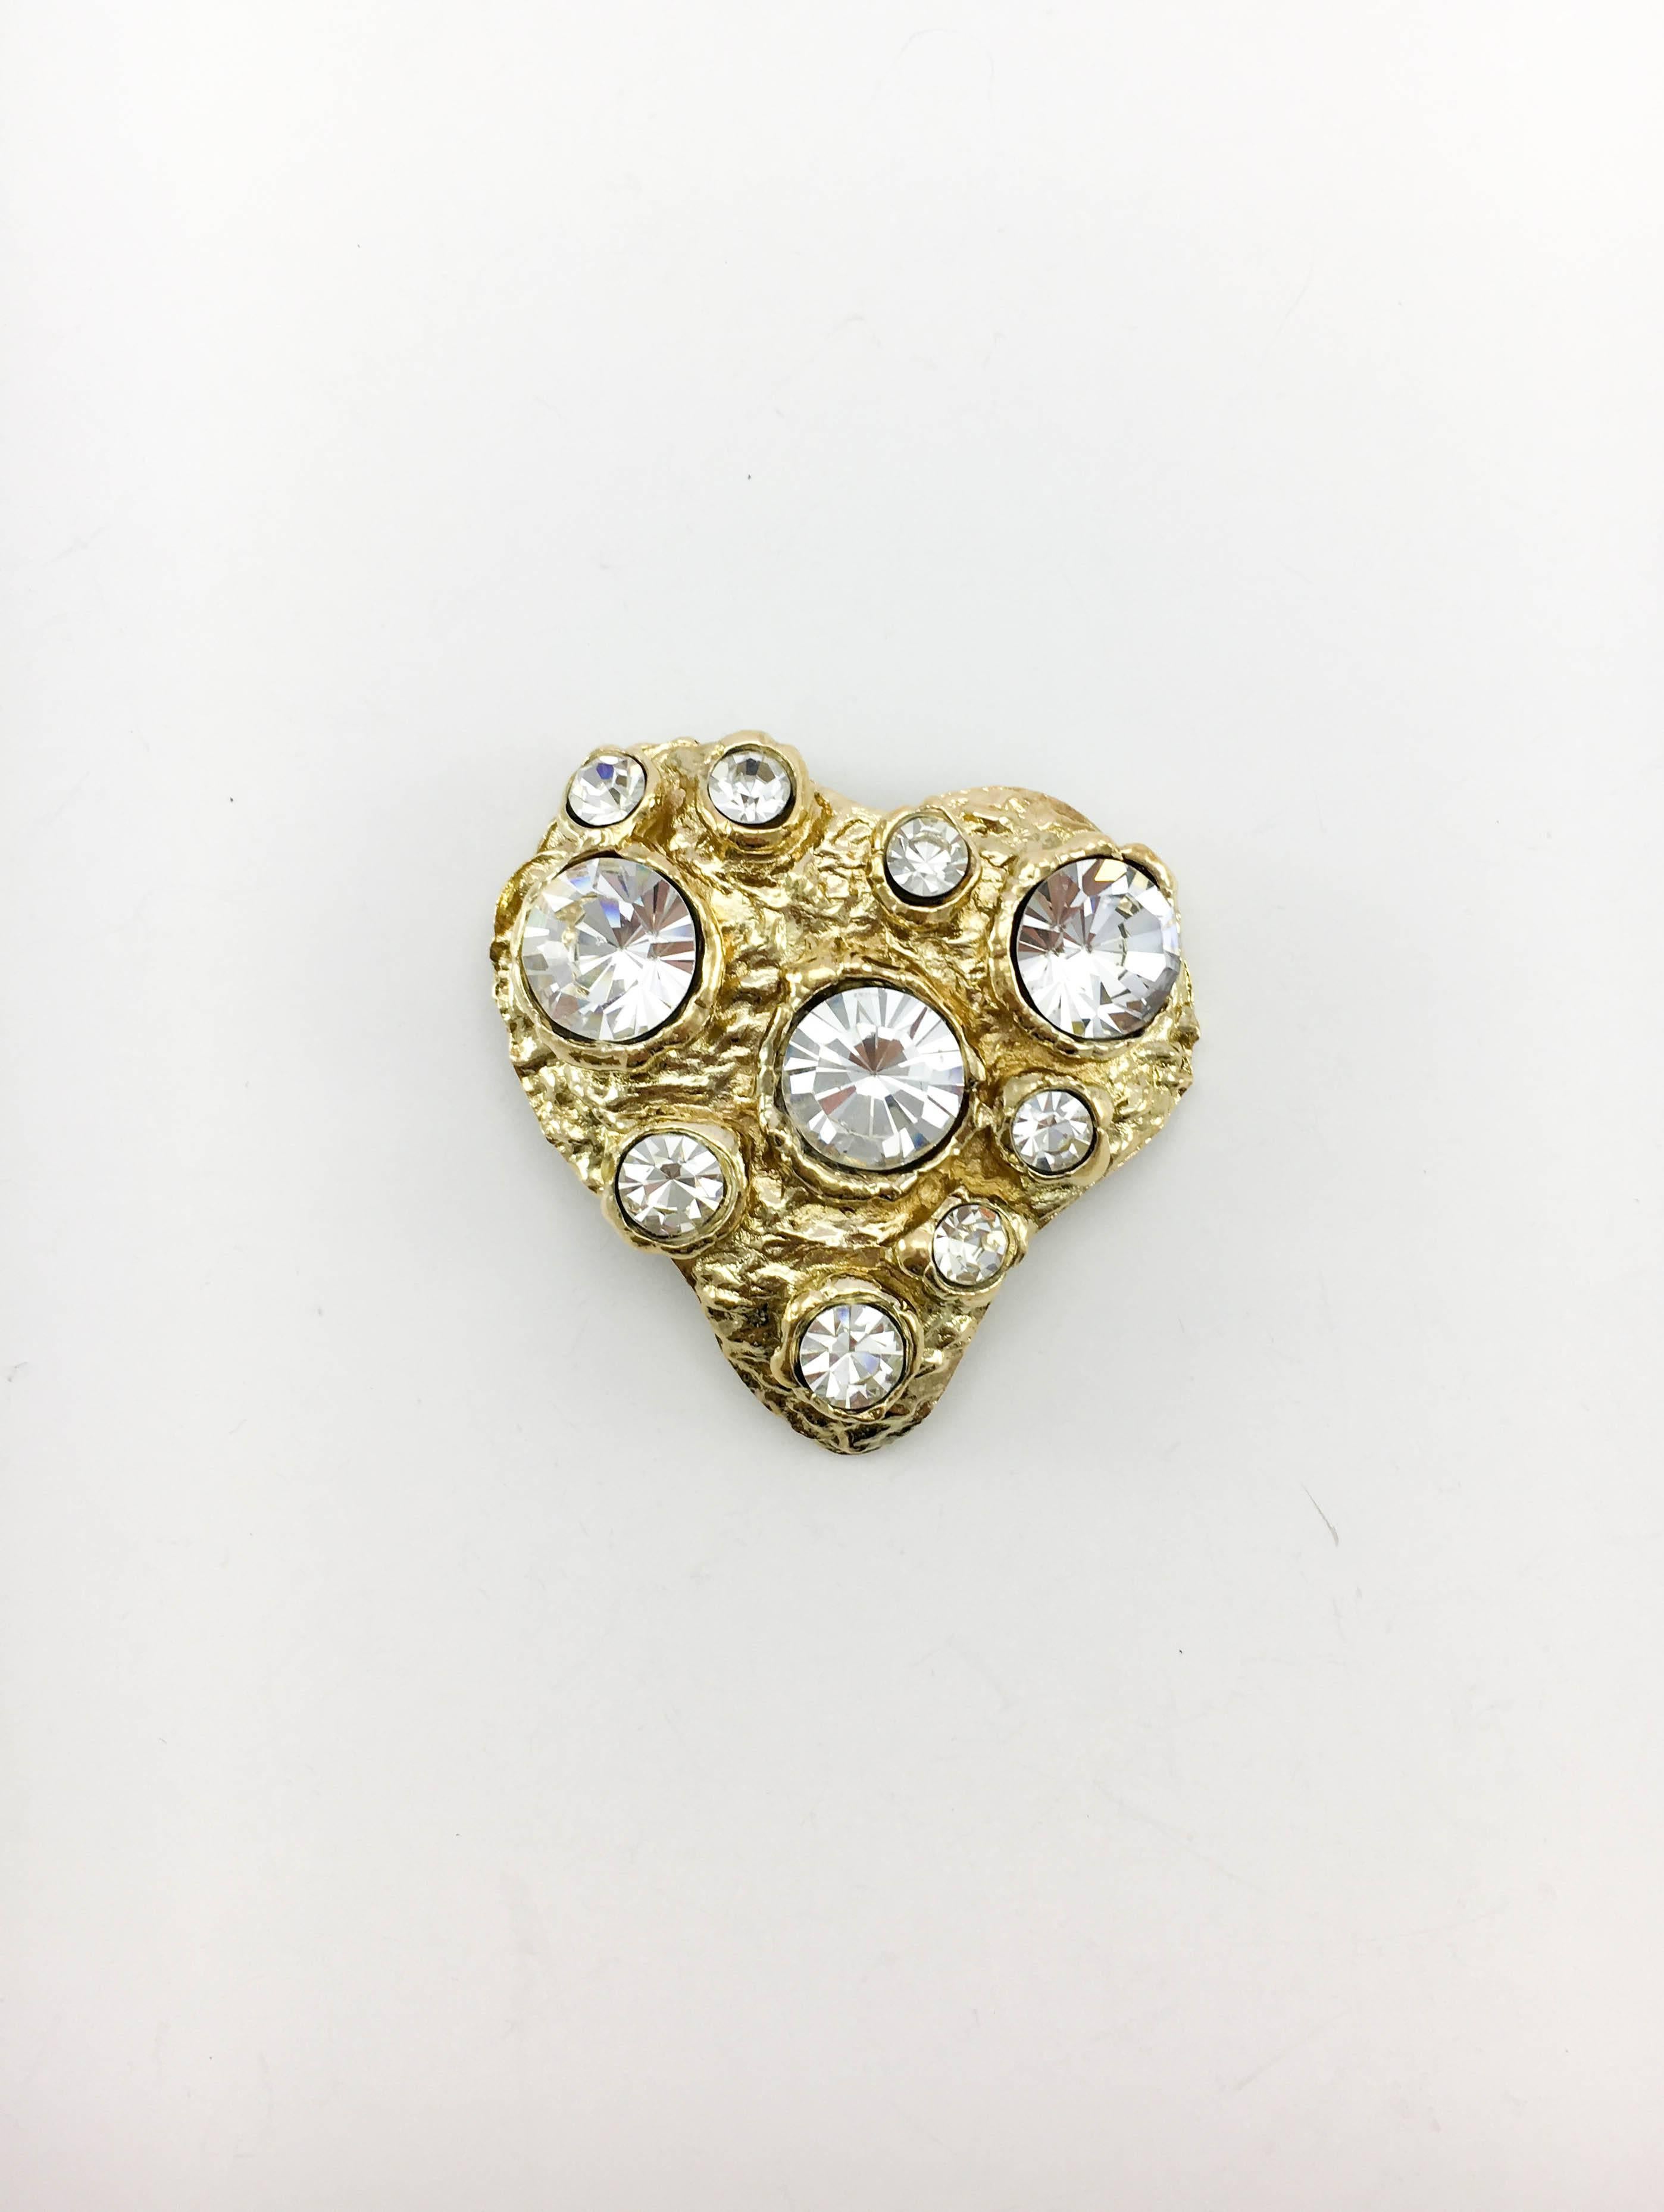 Vintage Christian Lacroix Crystal Gold-Plated Heart Brooch. This dramatic piece by Lacroix dates back from the 1980’s. In gold-plated metal, it is shaped as a large stylised heart encrusted with crystal beads in assorted sizes. Christian Lacroix